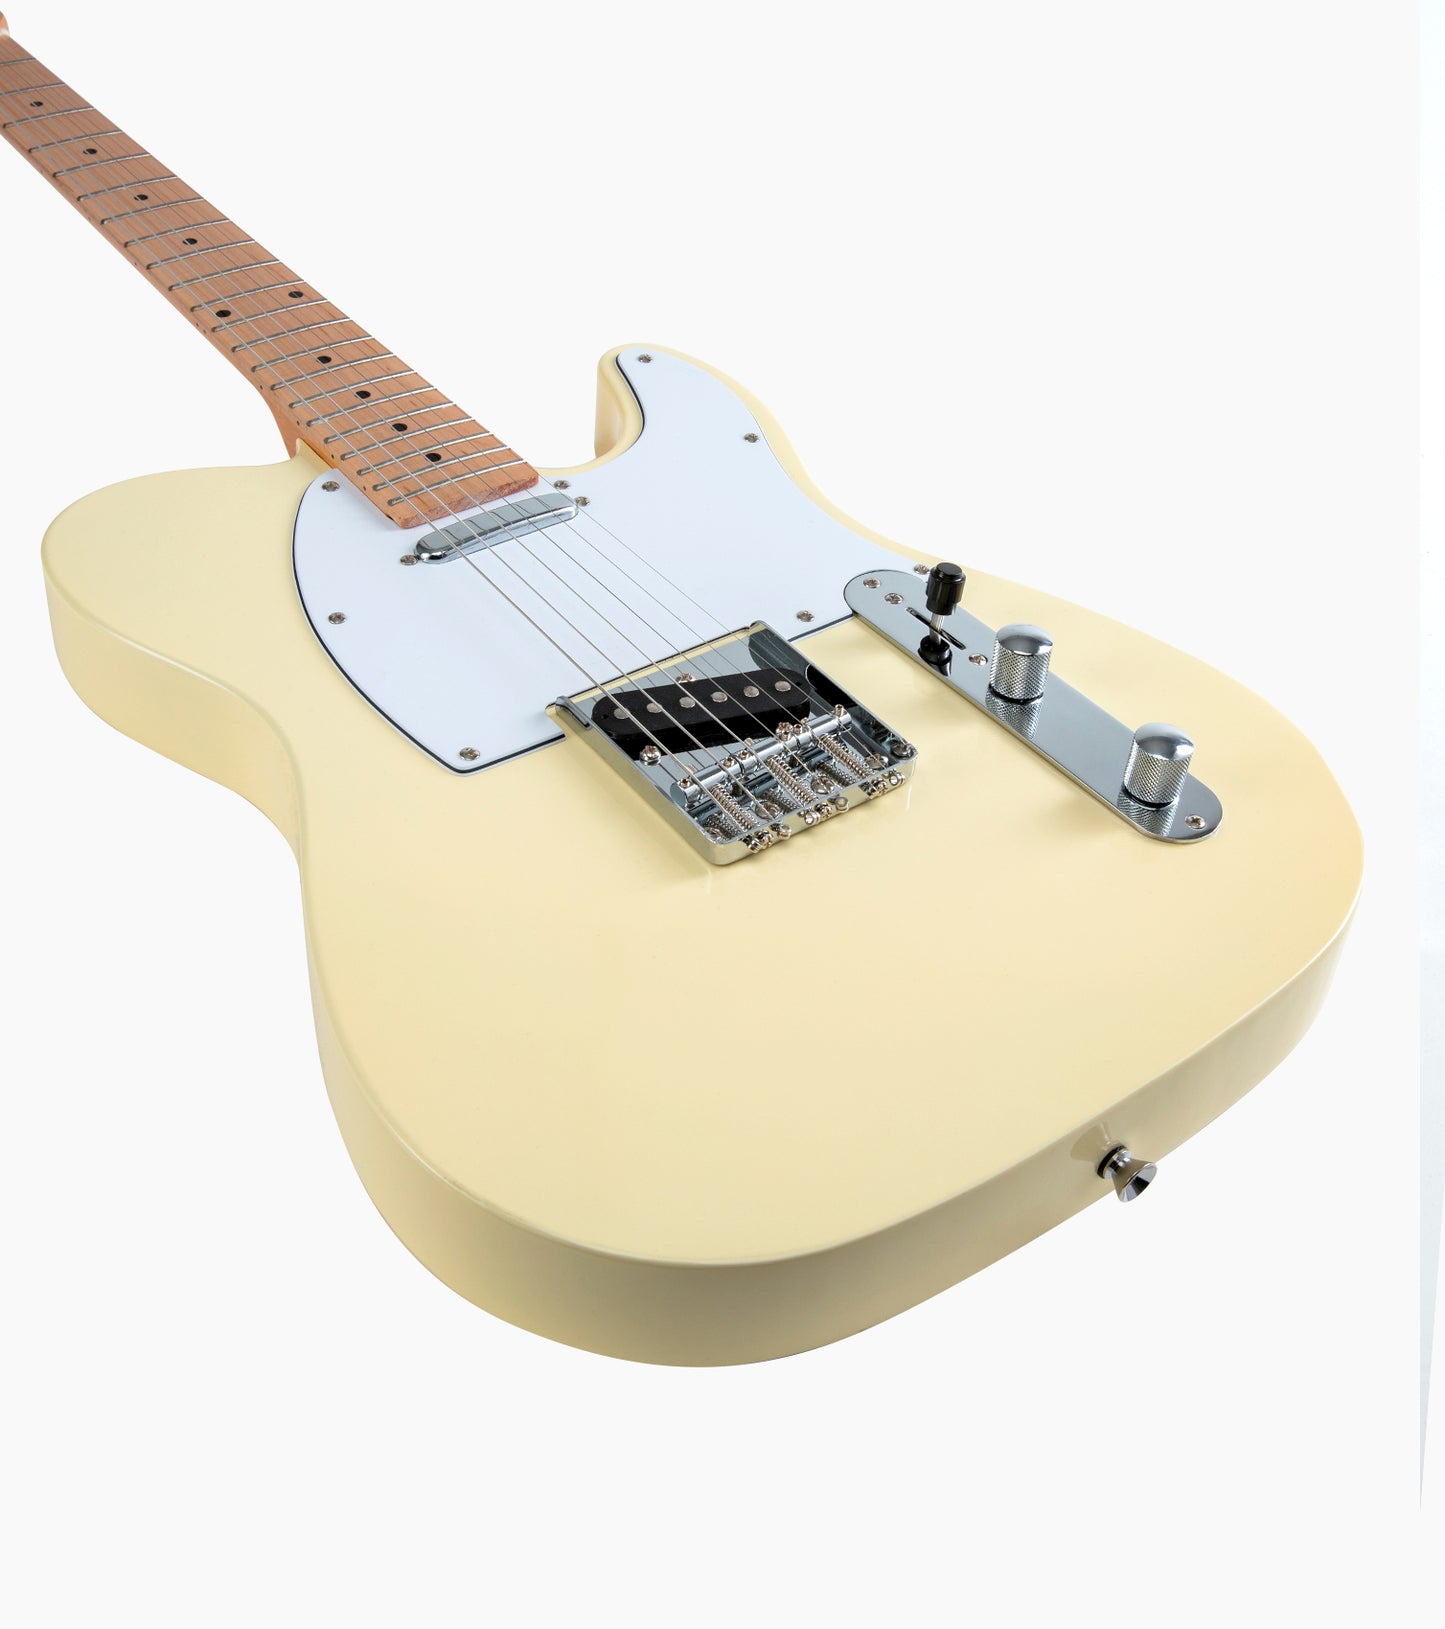 30 inch Telecaster Electric Guitar Cream White - Front